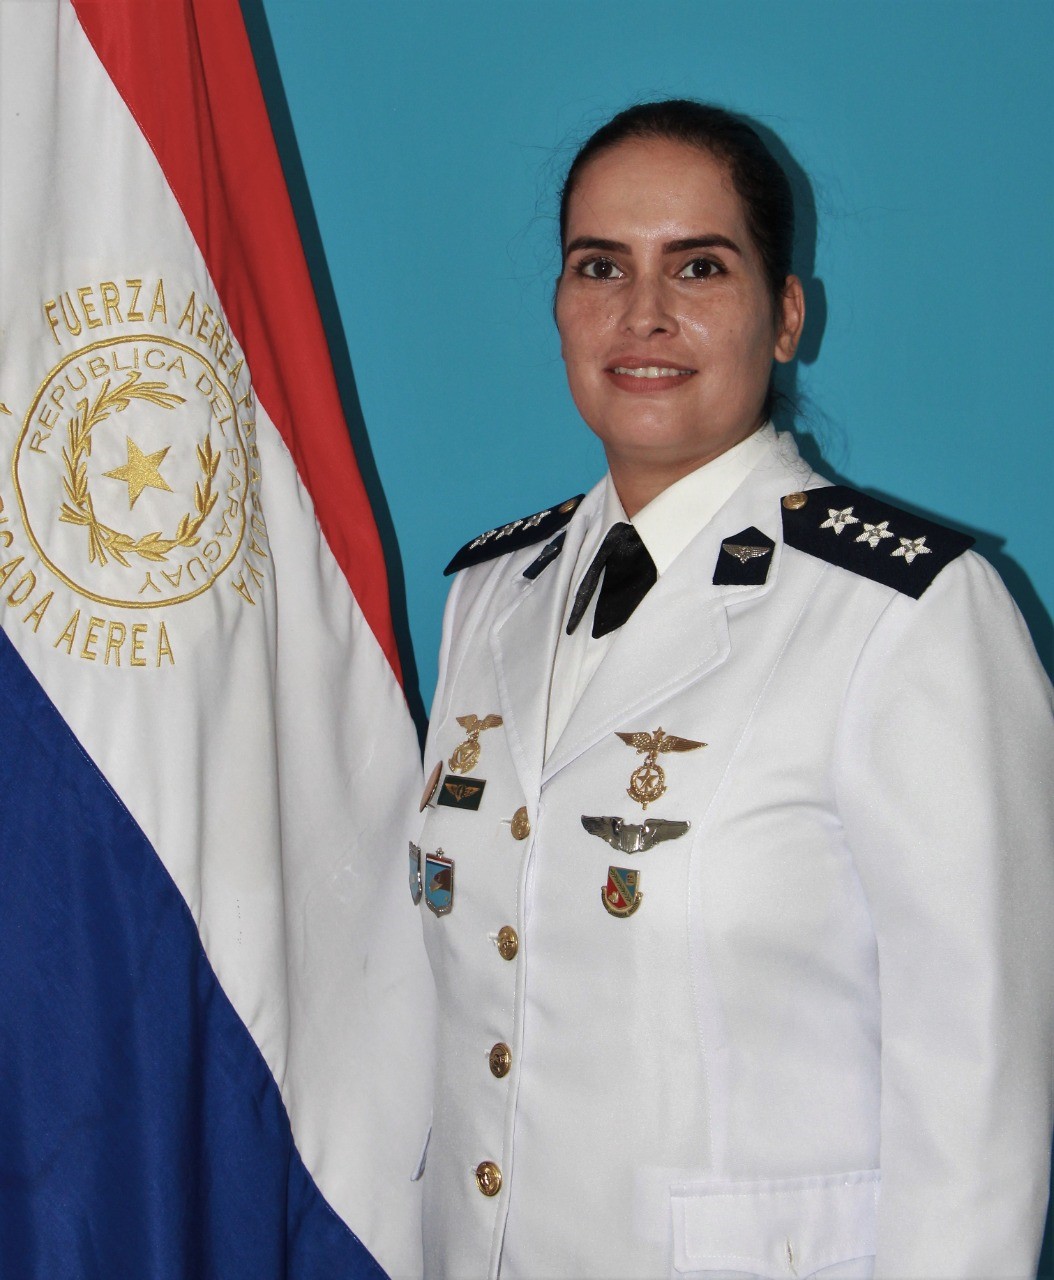 Strategic Training Supports Paraguayan Air Force Mission